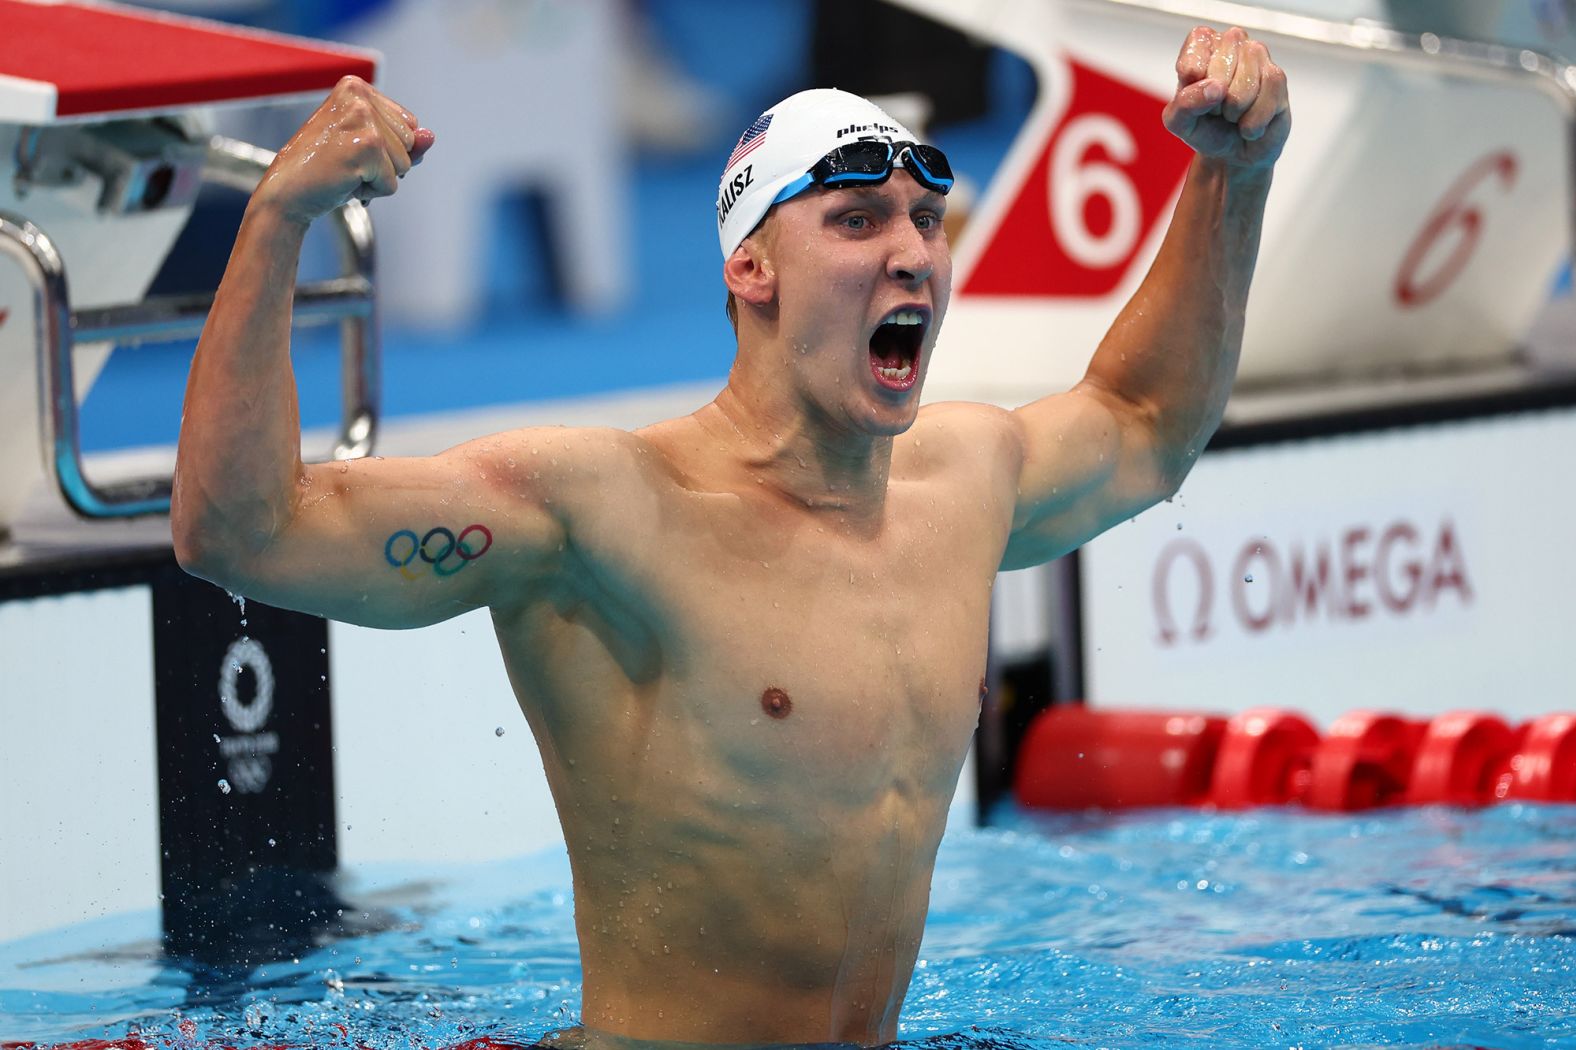 American swimmer Chase Kalisz celebrates after <a href="index.php?page=&url=https%3A%2F%2Fwww.cnn.com%2Fworld%2Flive-news%2Ftokyo-2020-olympics-07-24-21-spt%2Fh_c0d4c27f23d71040fdc15b662e33cae2" target="_blank">winning gold in the 400-meter individual medley</a> on July 25. It was the first medal for the United States in this year's Olympics.